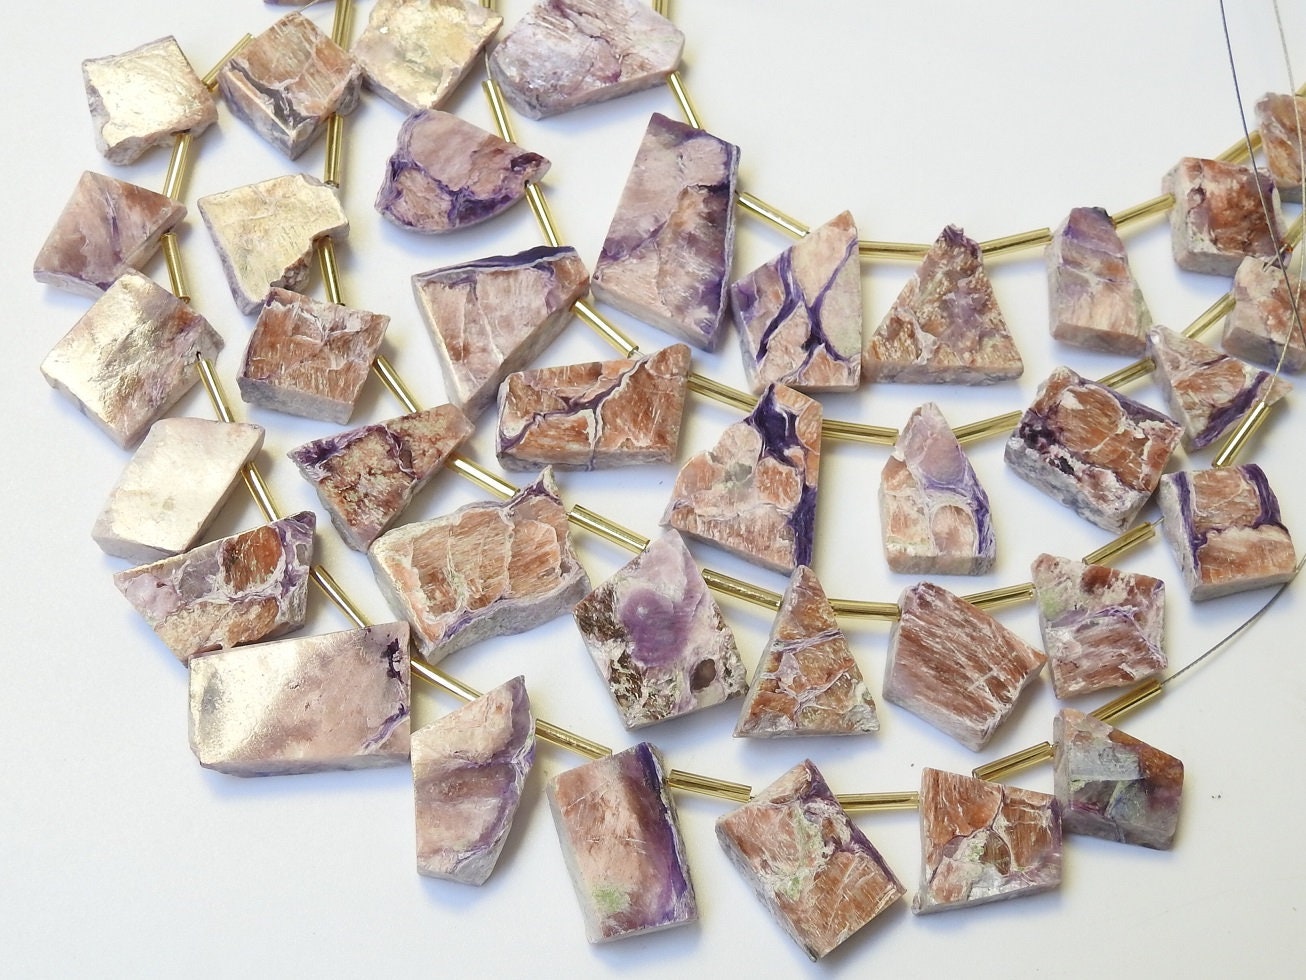 Charoite Polished Rough Slice,Slab,Stick,Loose Raw,11Pieces Strand 20X15To11X11MM Approx,Wholesaler,Supplies,100%Natural PME-R4 | Save 33% - Rajasthan Living 15